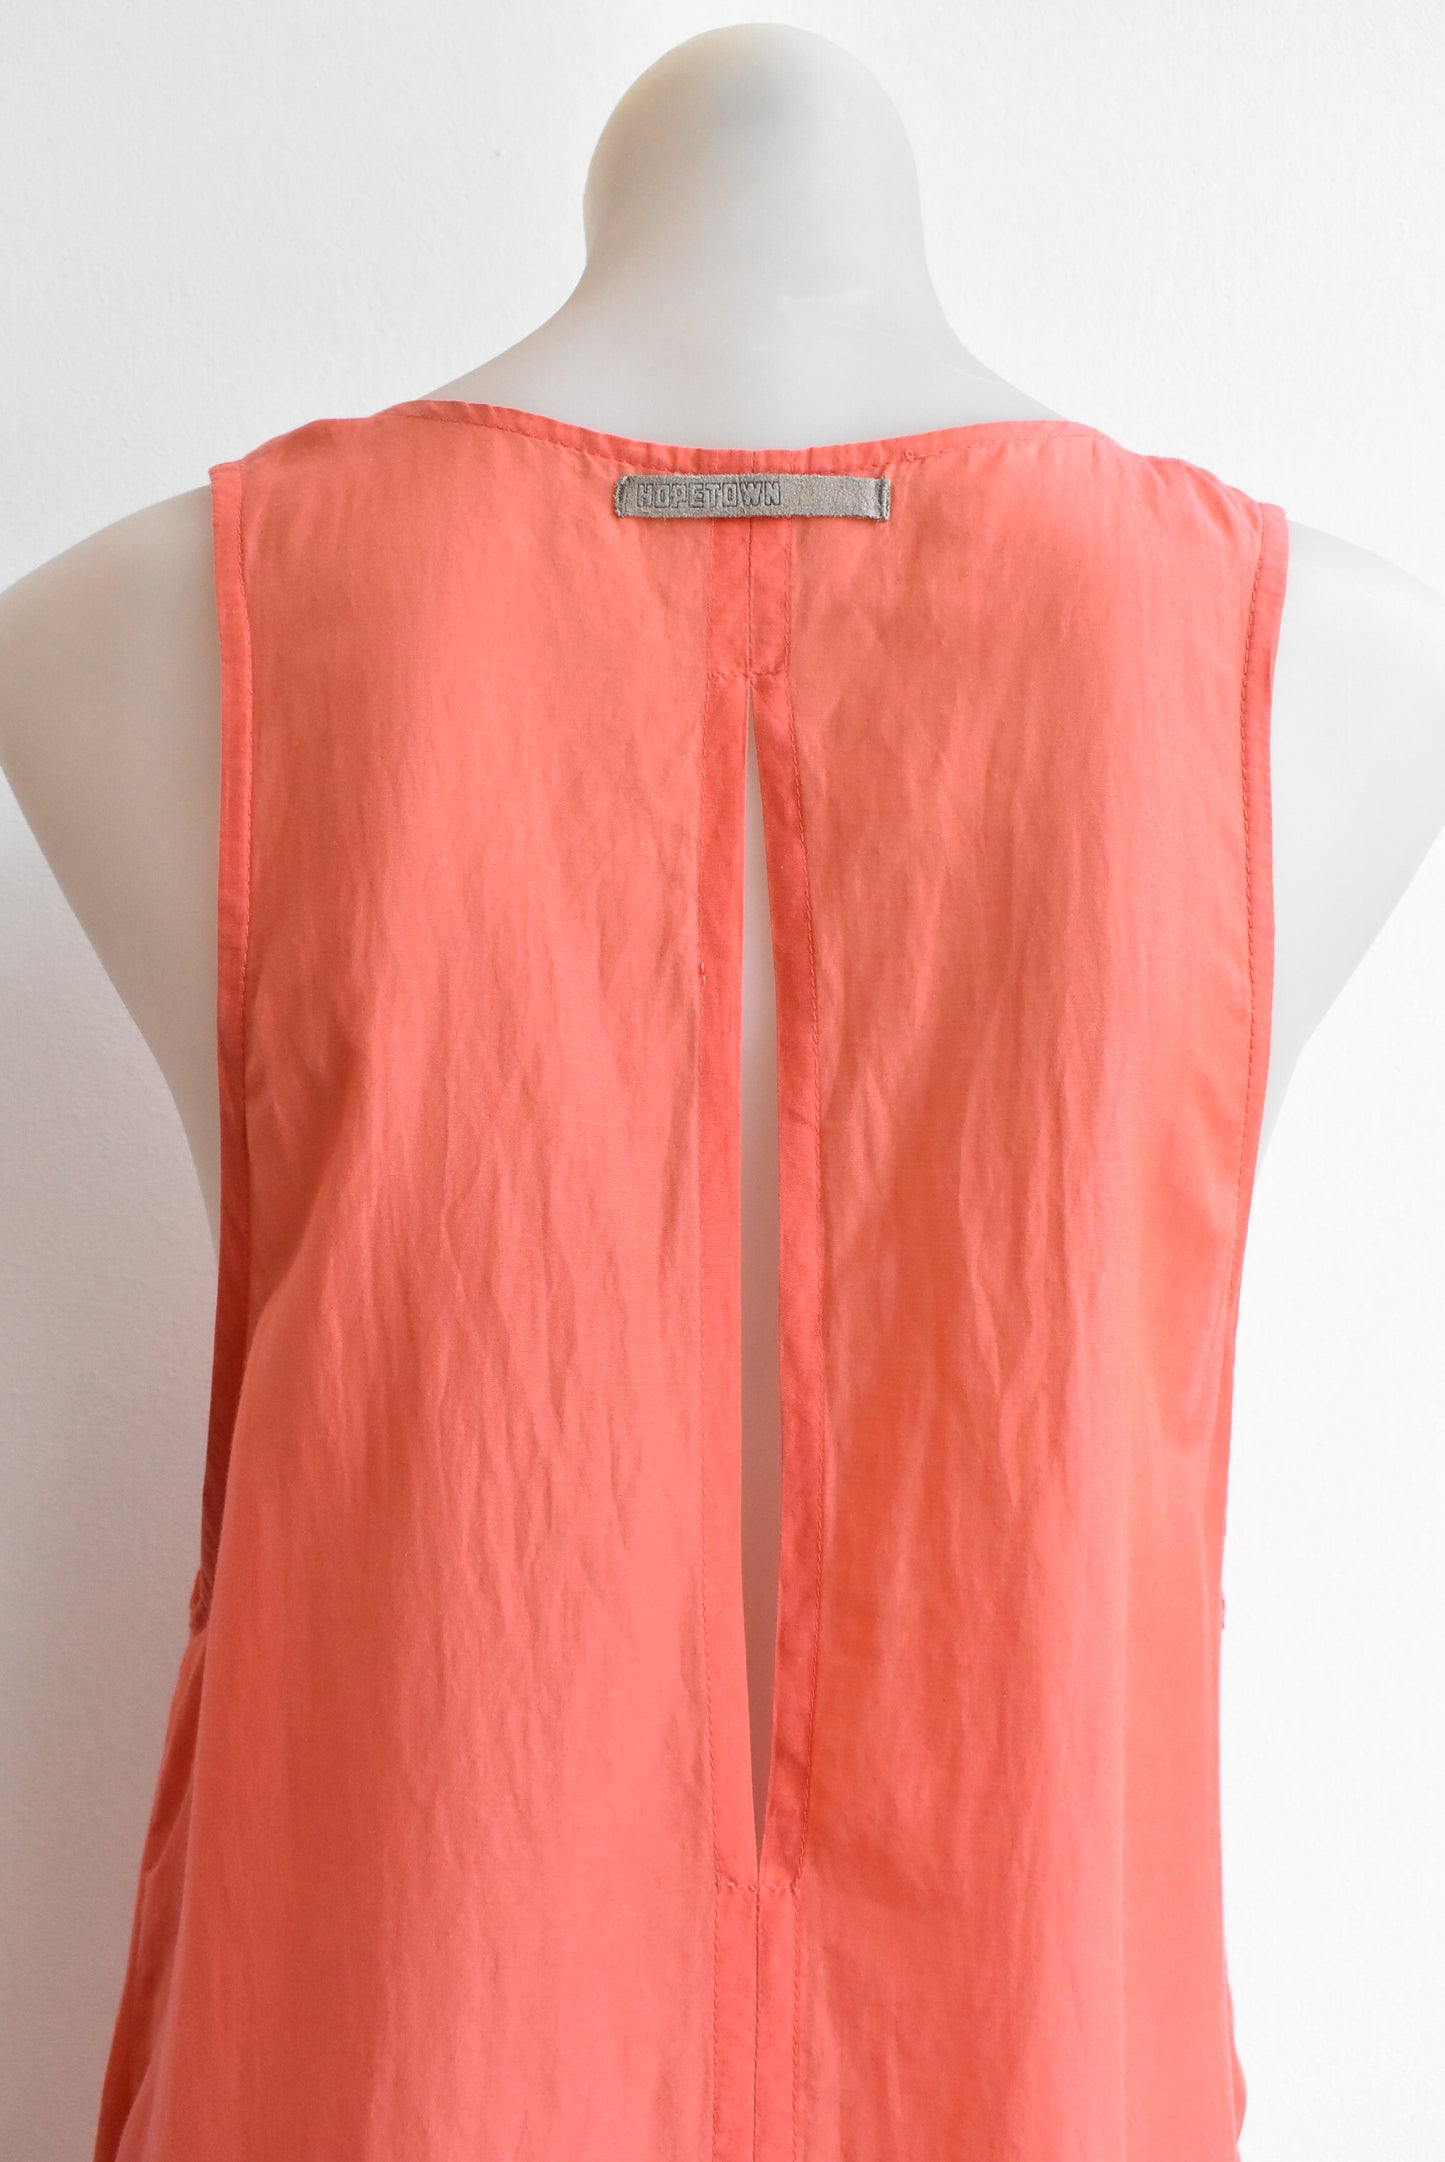 Hopetown coral silk sleeveless dress with front paneling. M